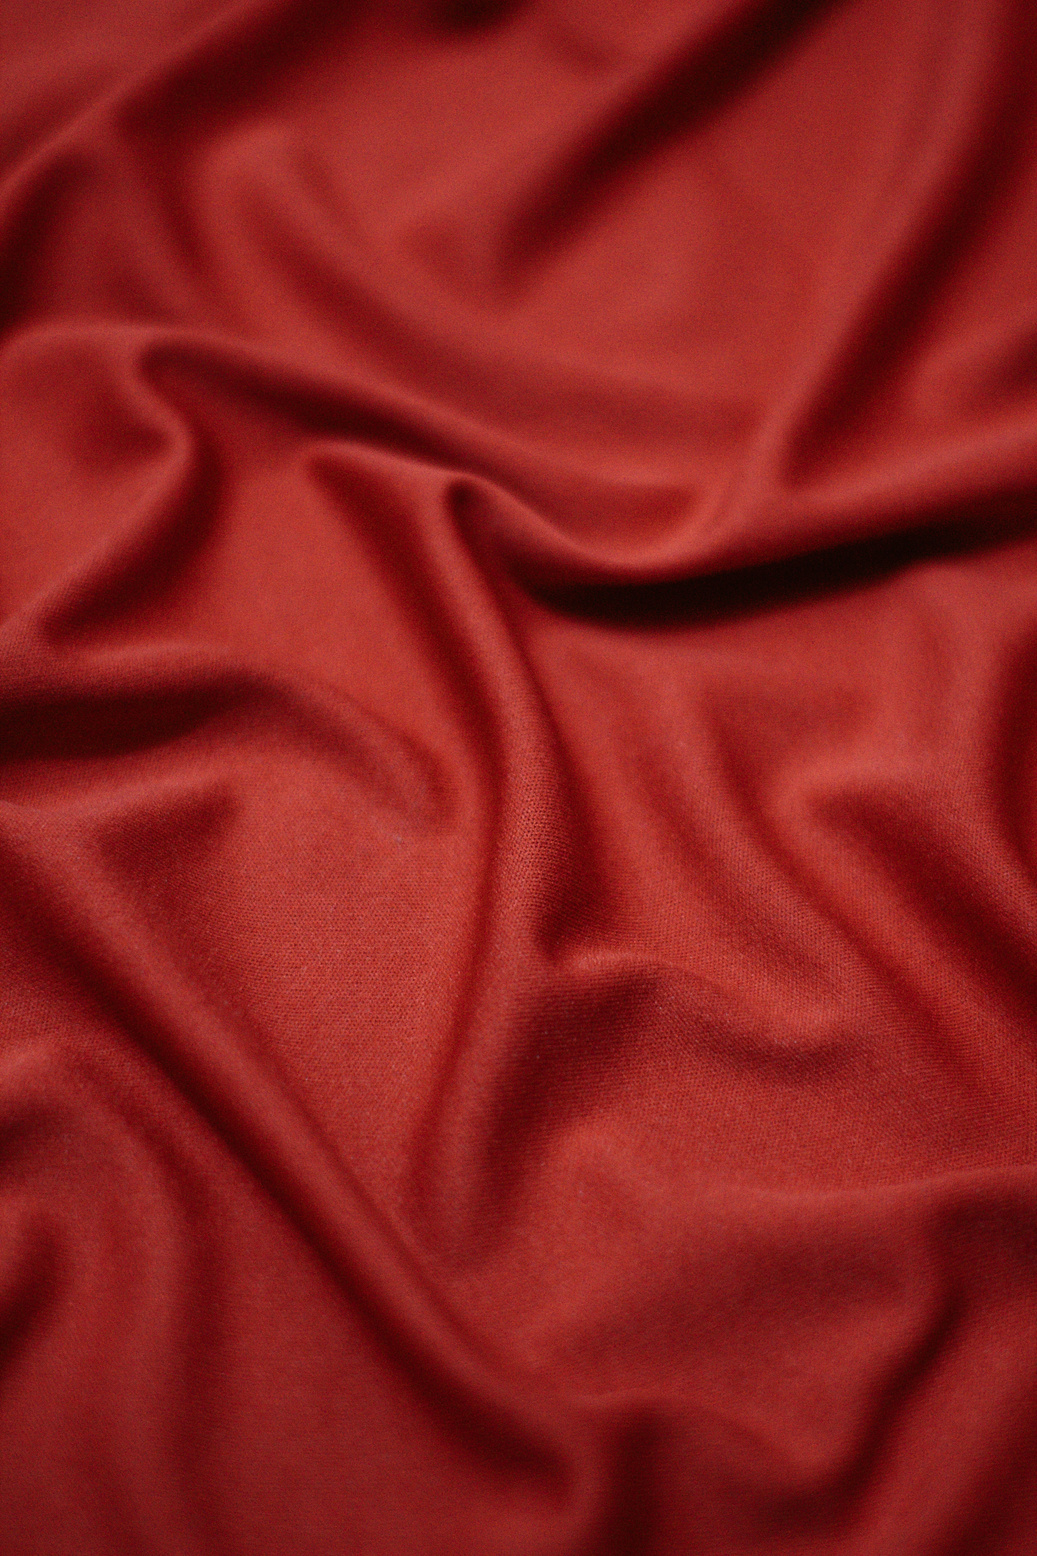 Soft Red Fabric